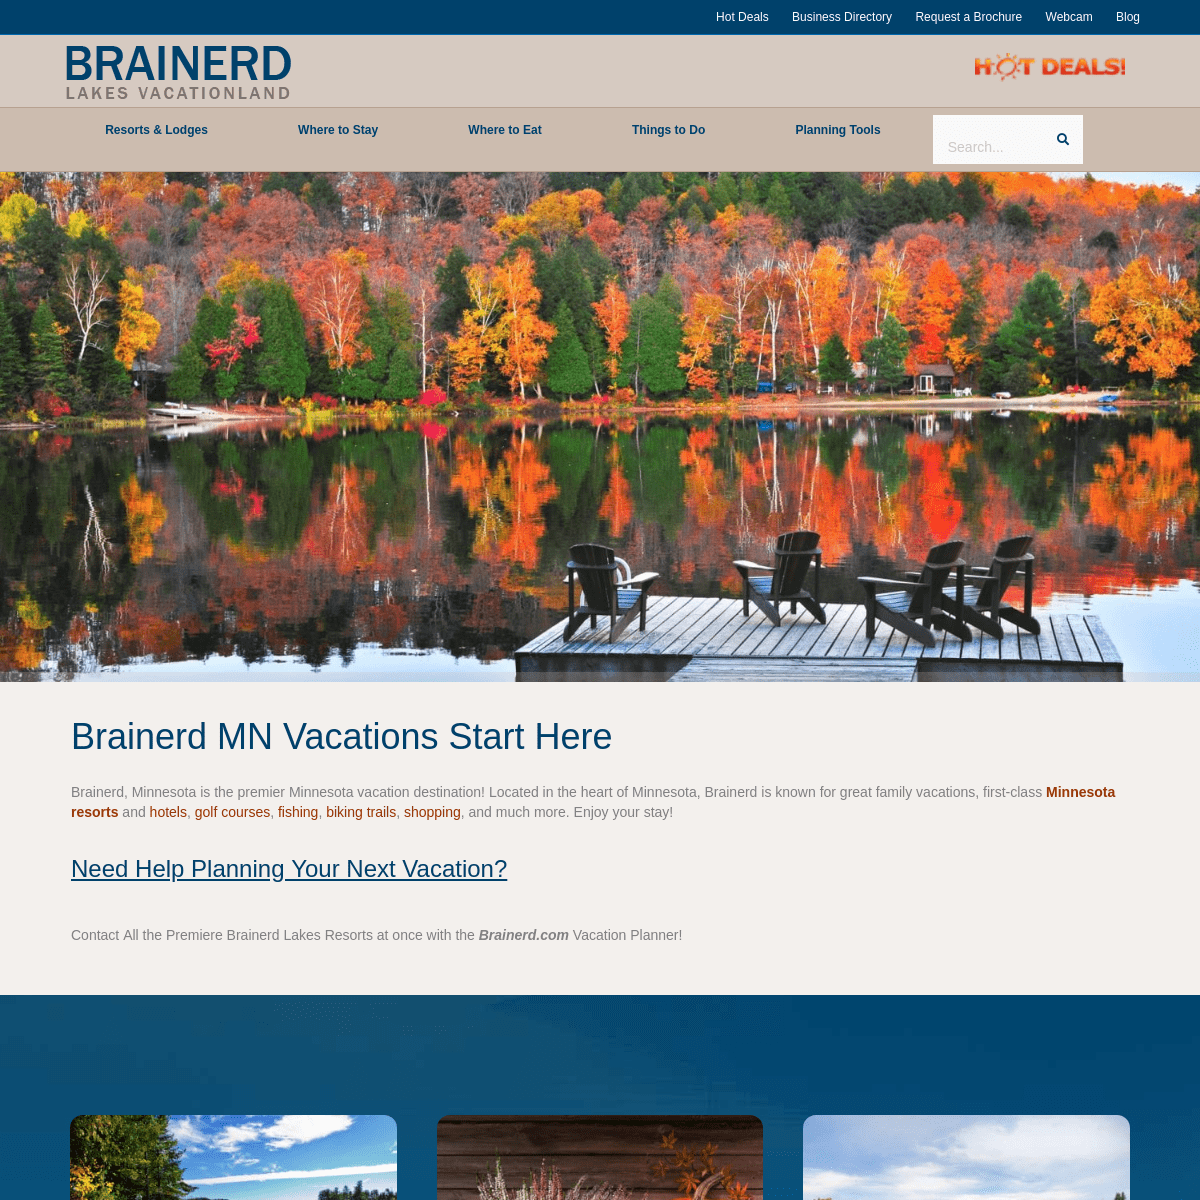 A complete backup of brainerd.com